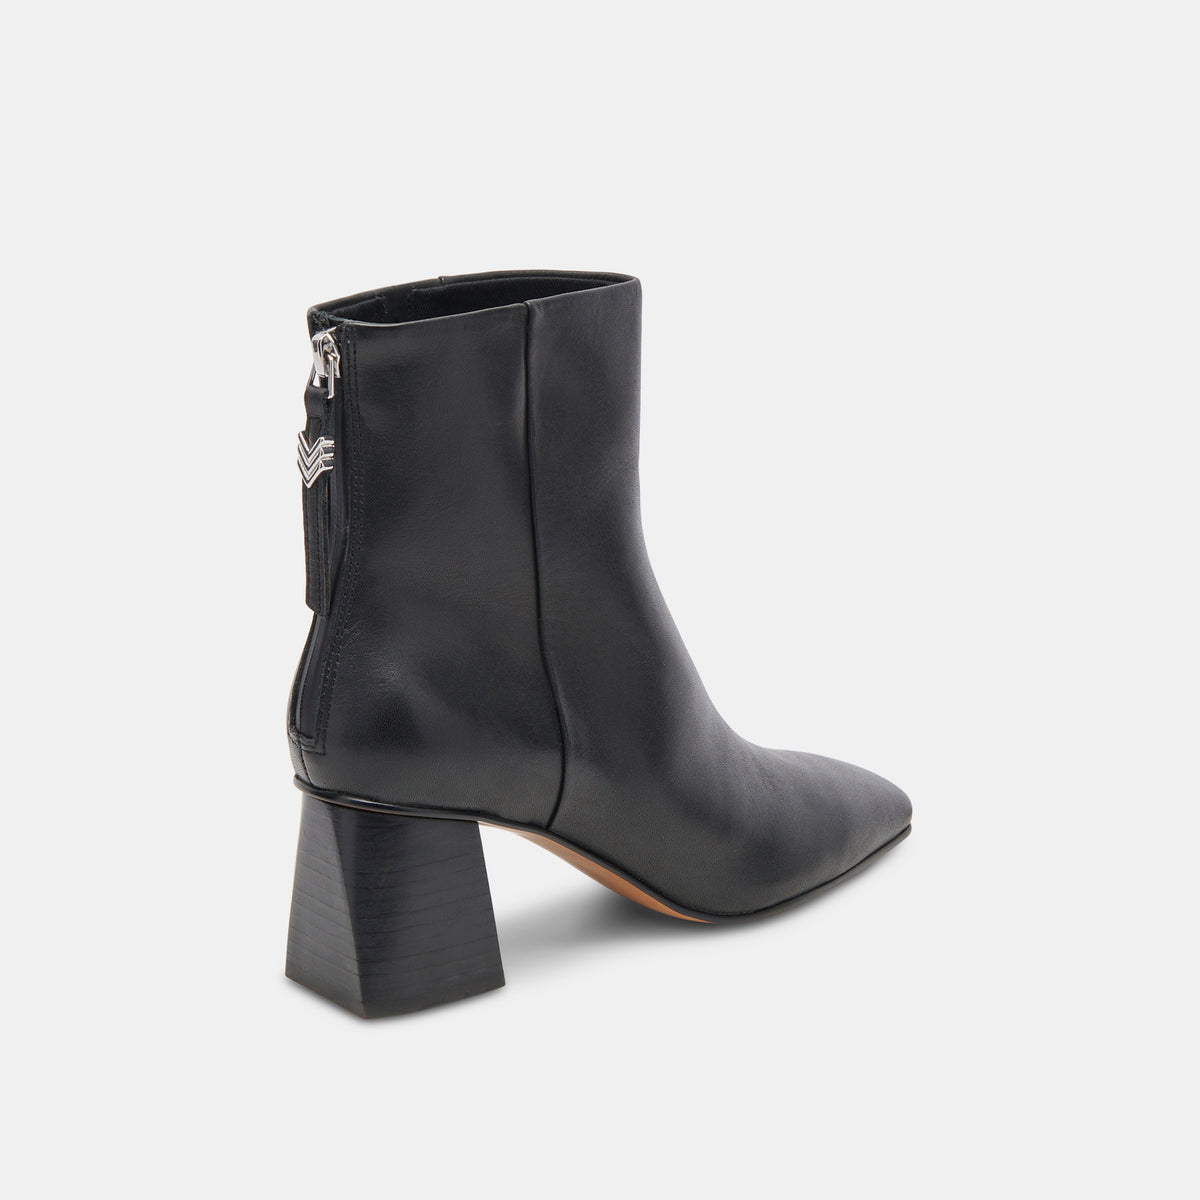 FIFI H2O WIDE BOOTIES BLACK LEATHER – Dolce Vita